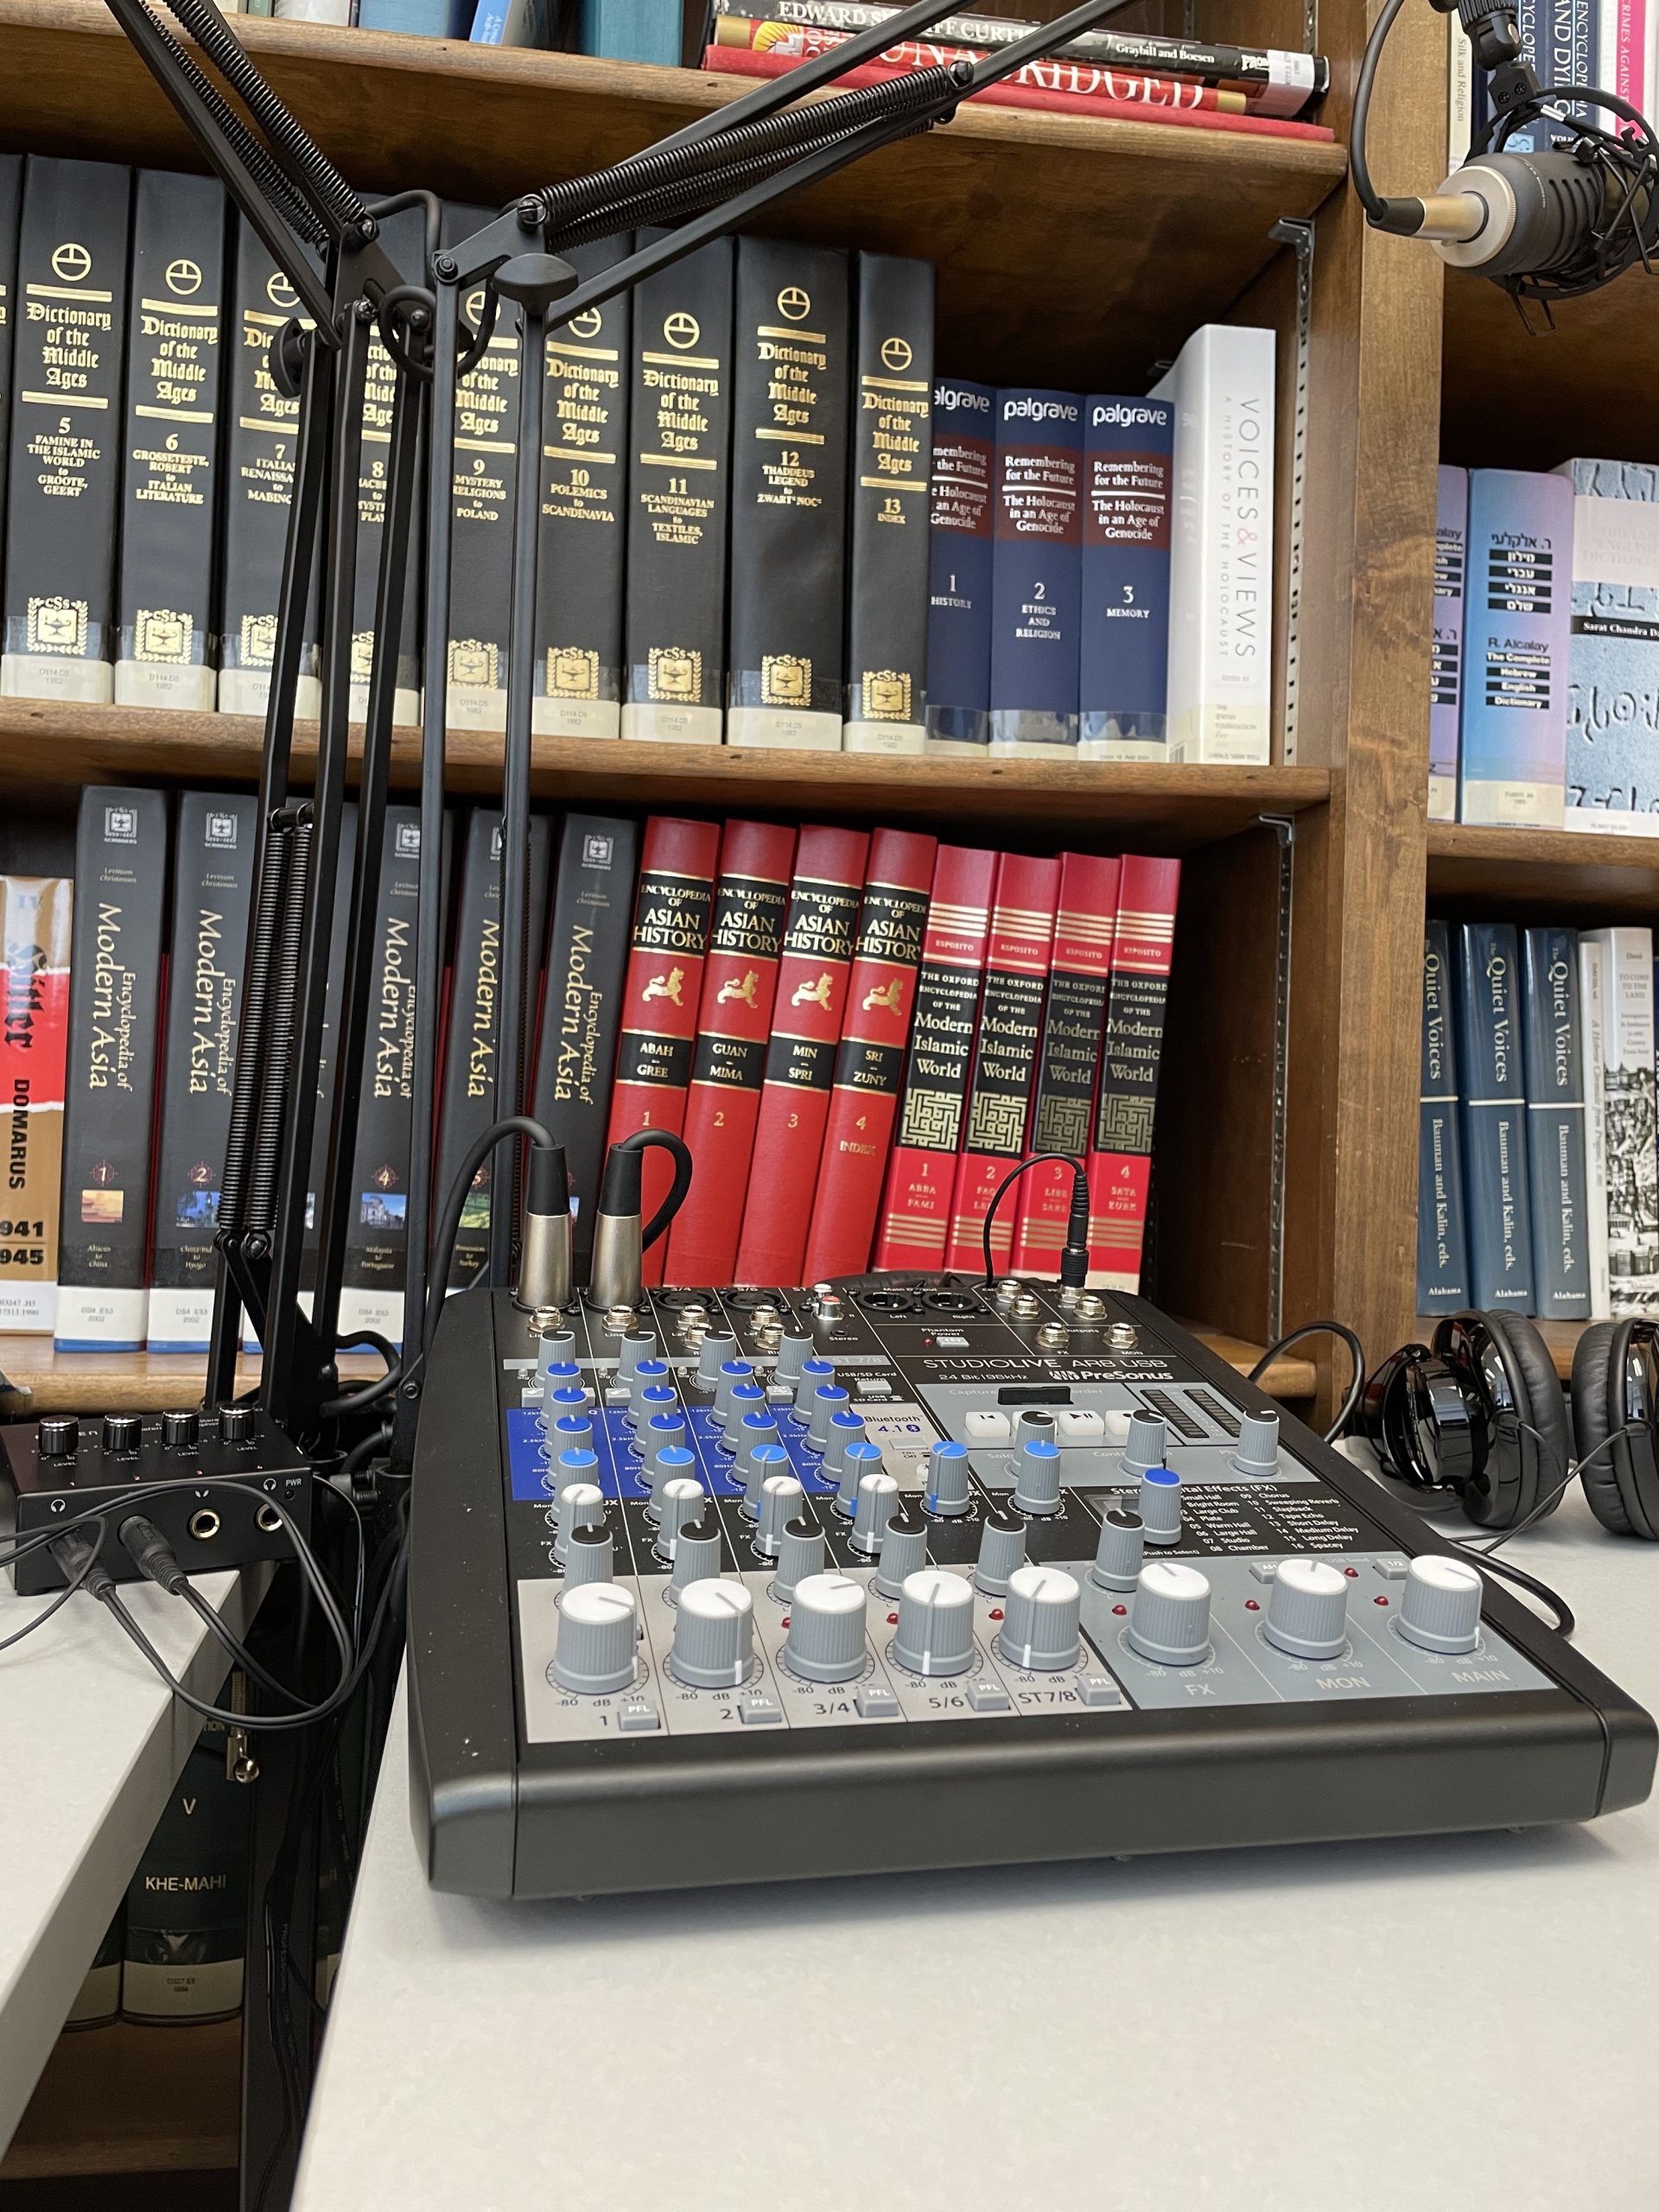 Audio Equipment and Reference Books